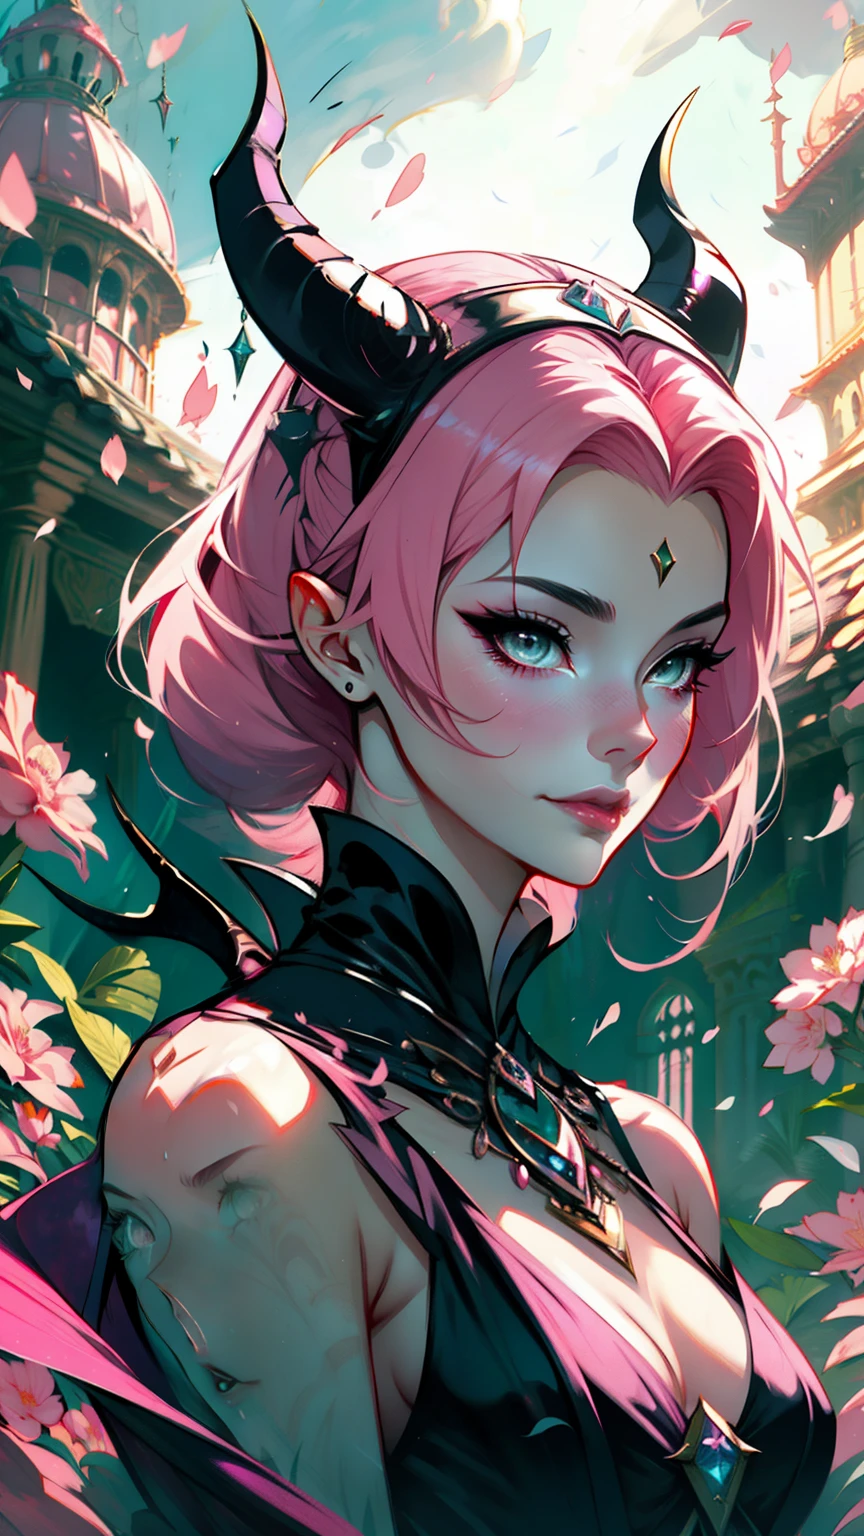 1womanl, dressed up as maleficent, strong emotions, sakura, shorth hair, Lumiere, focusing, how malevolent, pink hair, fully body, horns on head, 独奏, magic around you. random00d . illustration